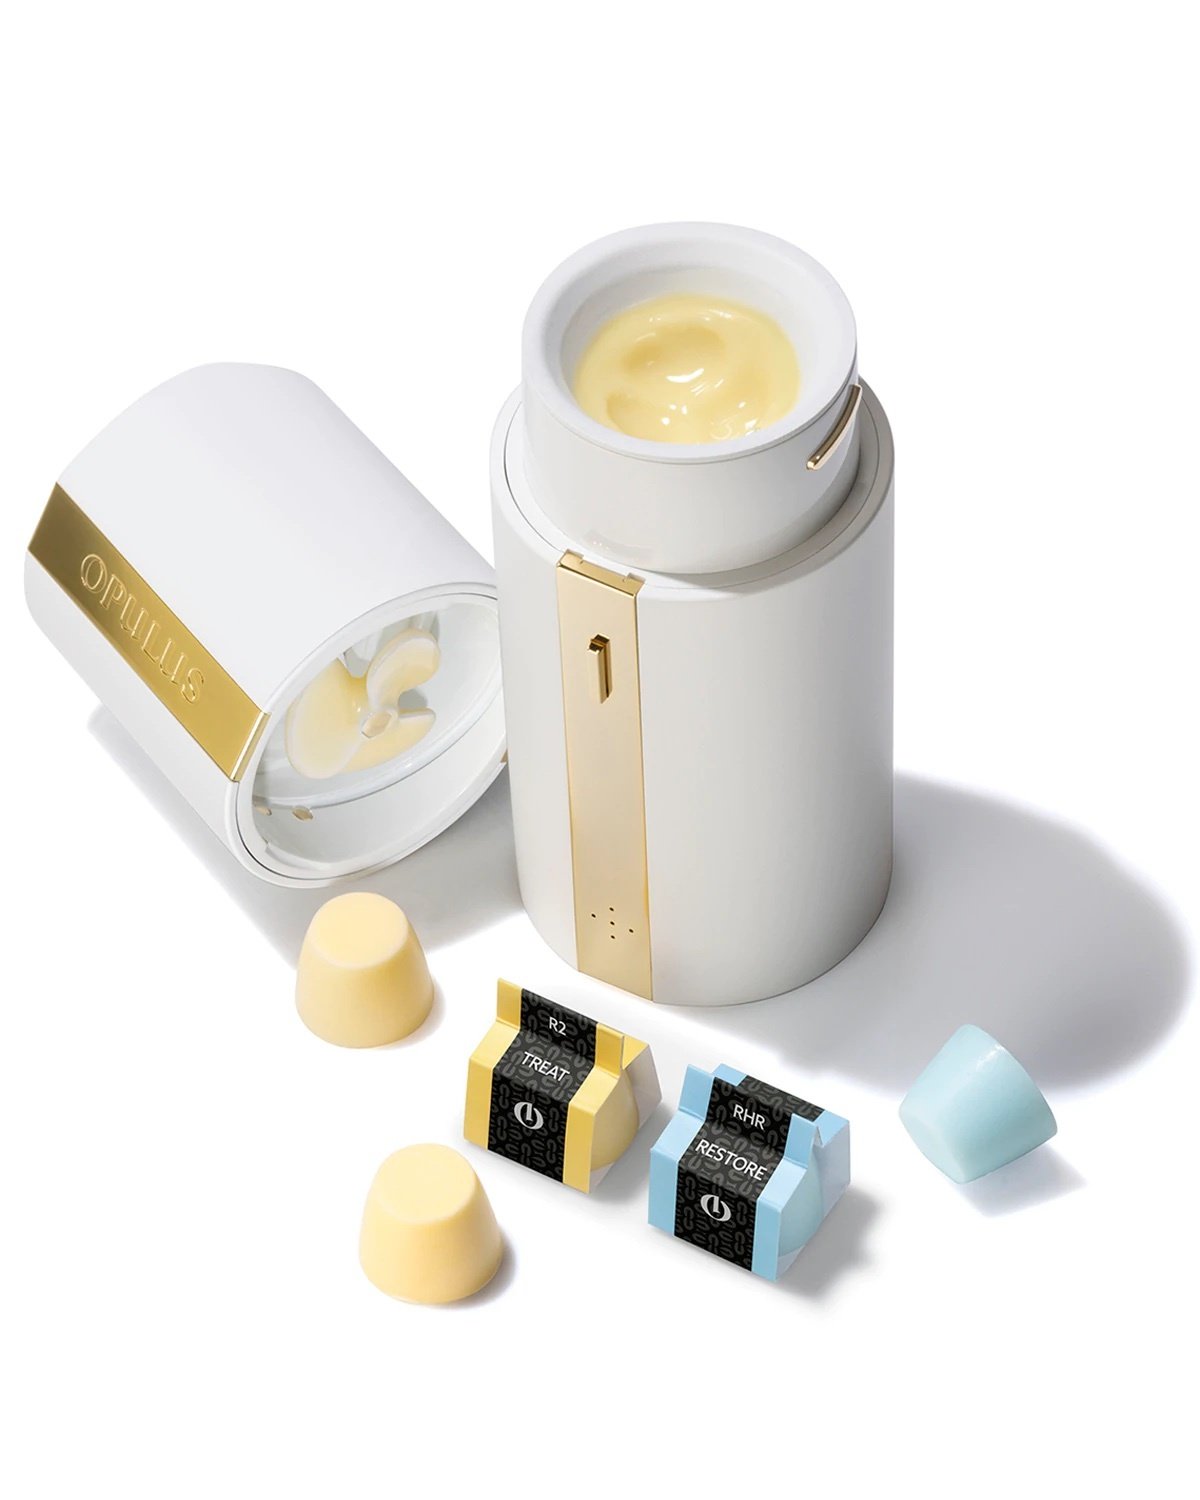 White cylindrical device with gold stripe in the middle. The cap is off to reveal a light yellow lotion-like skincare treatment inside. Small pods with more treatment sit next to it. 